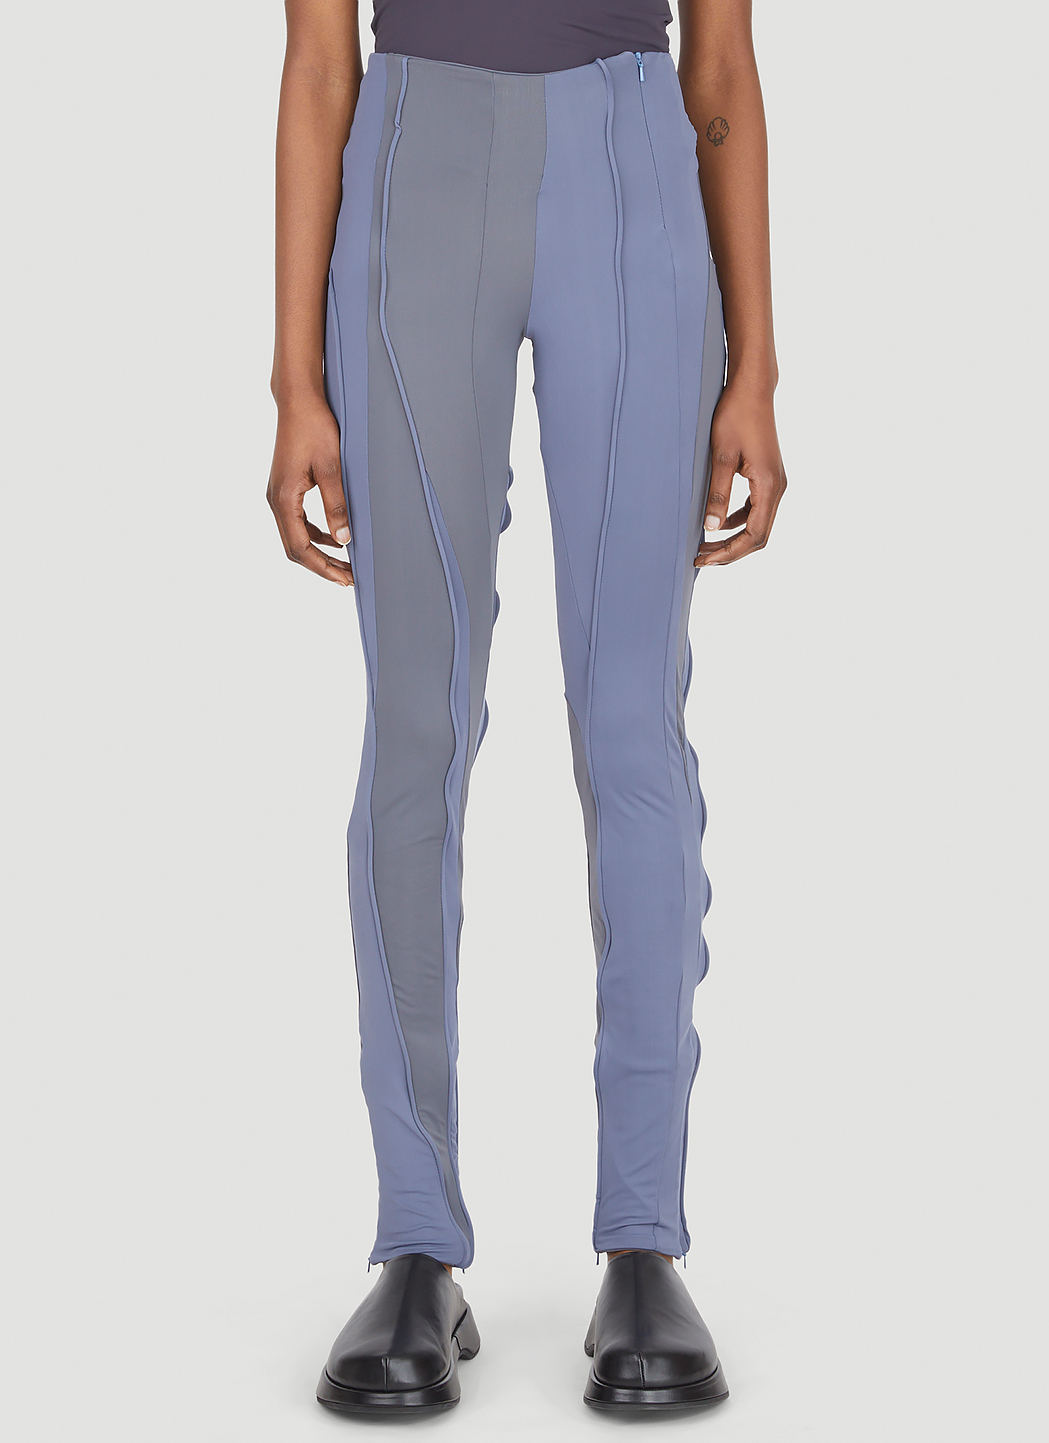 Two-Tone Panelled Pants